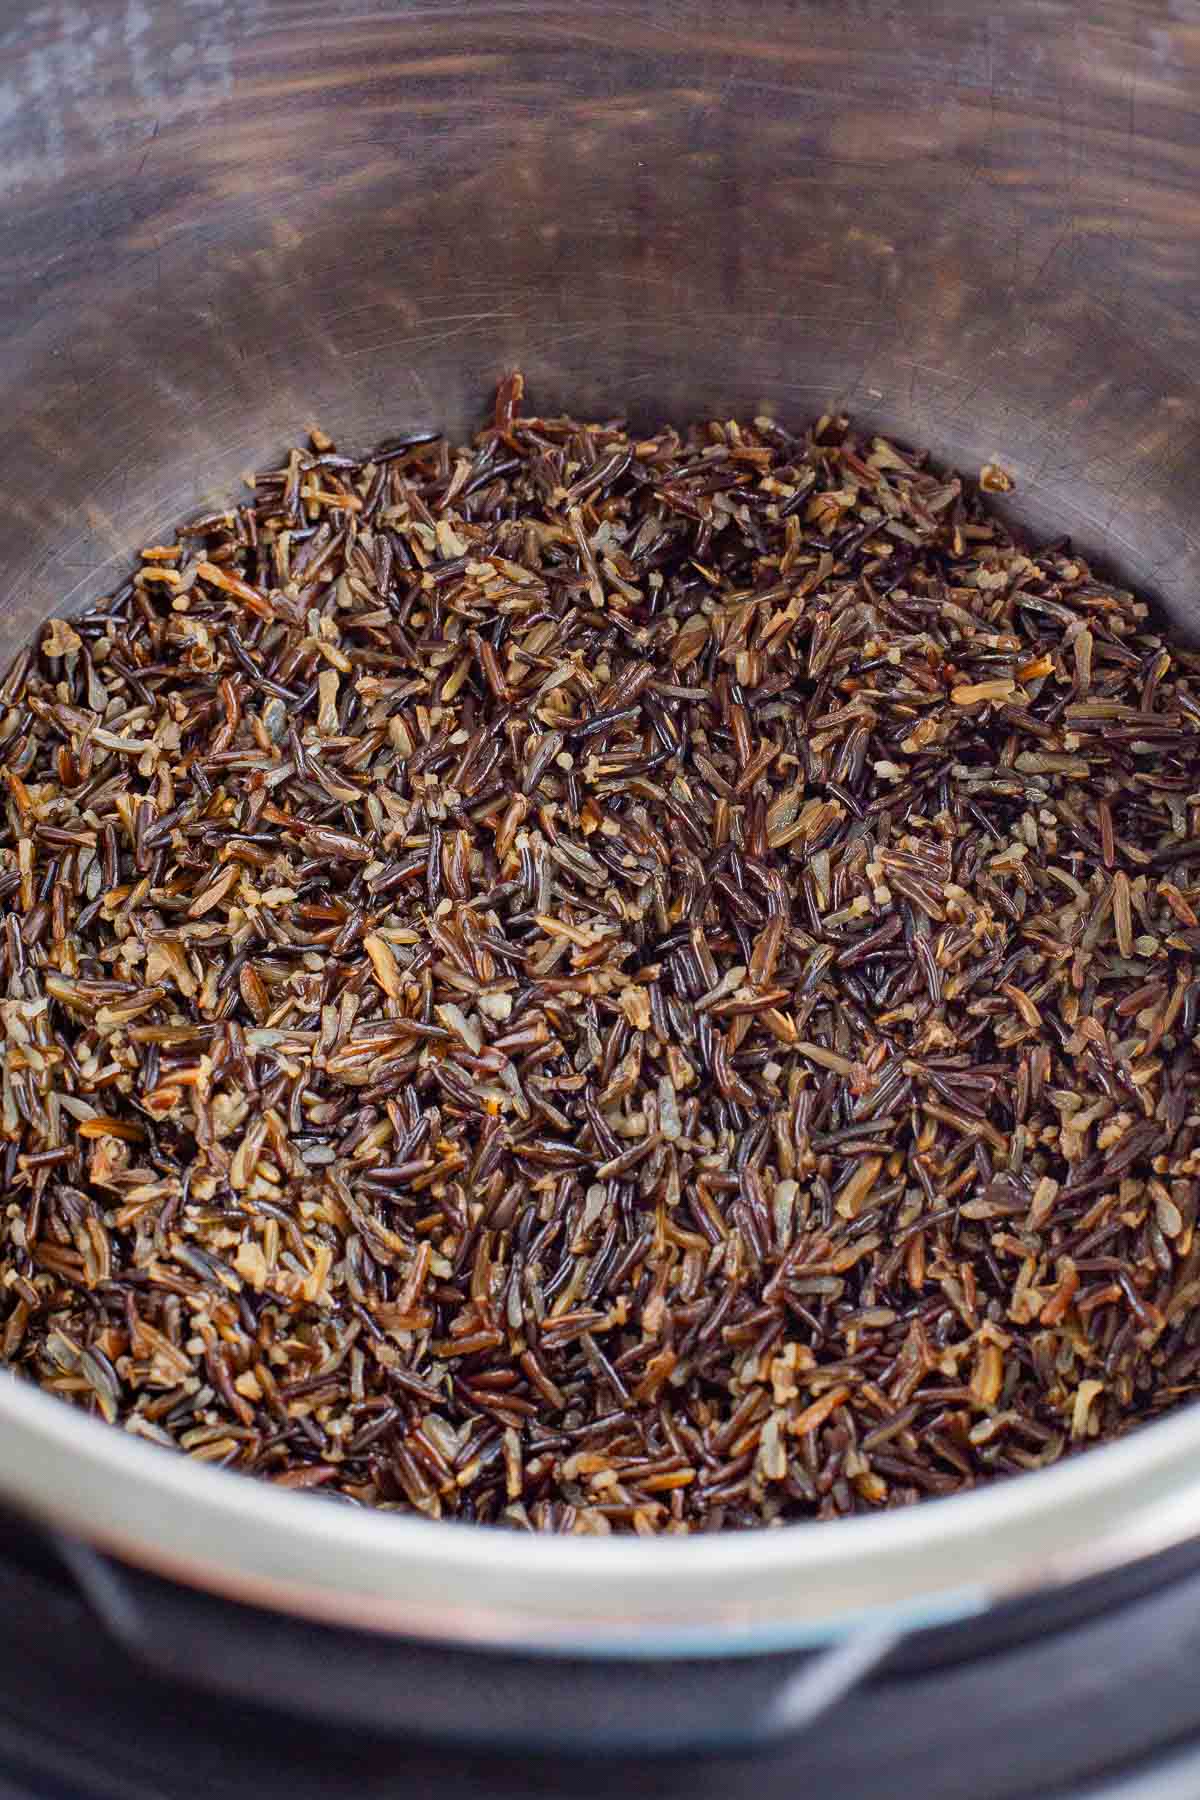 Wild rice cooks up quickly in a pressure cooker.